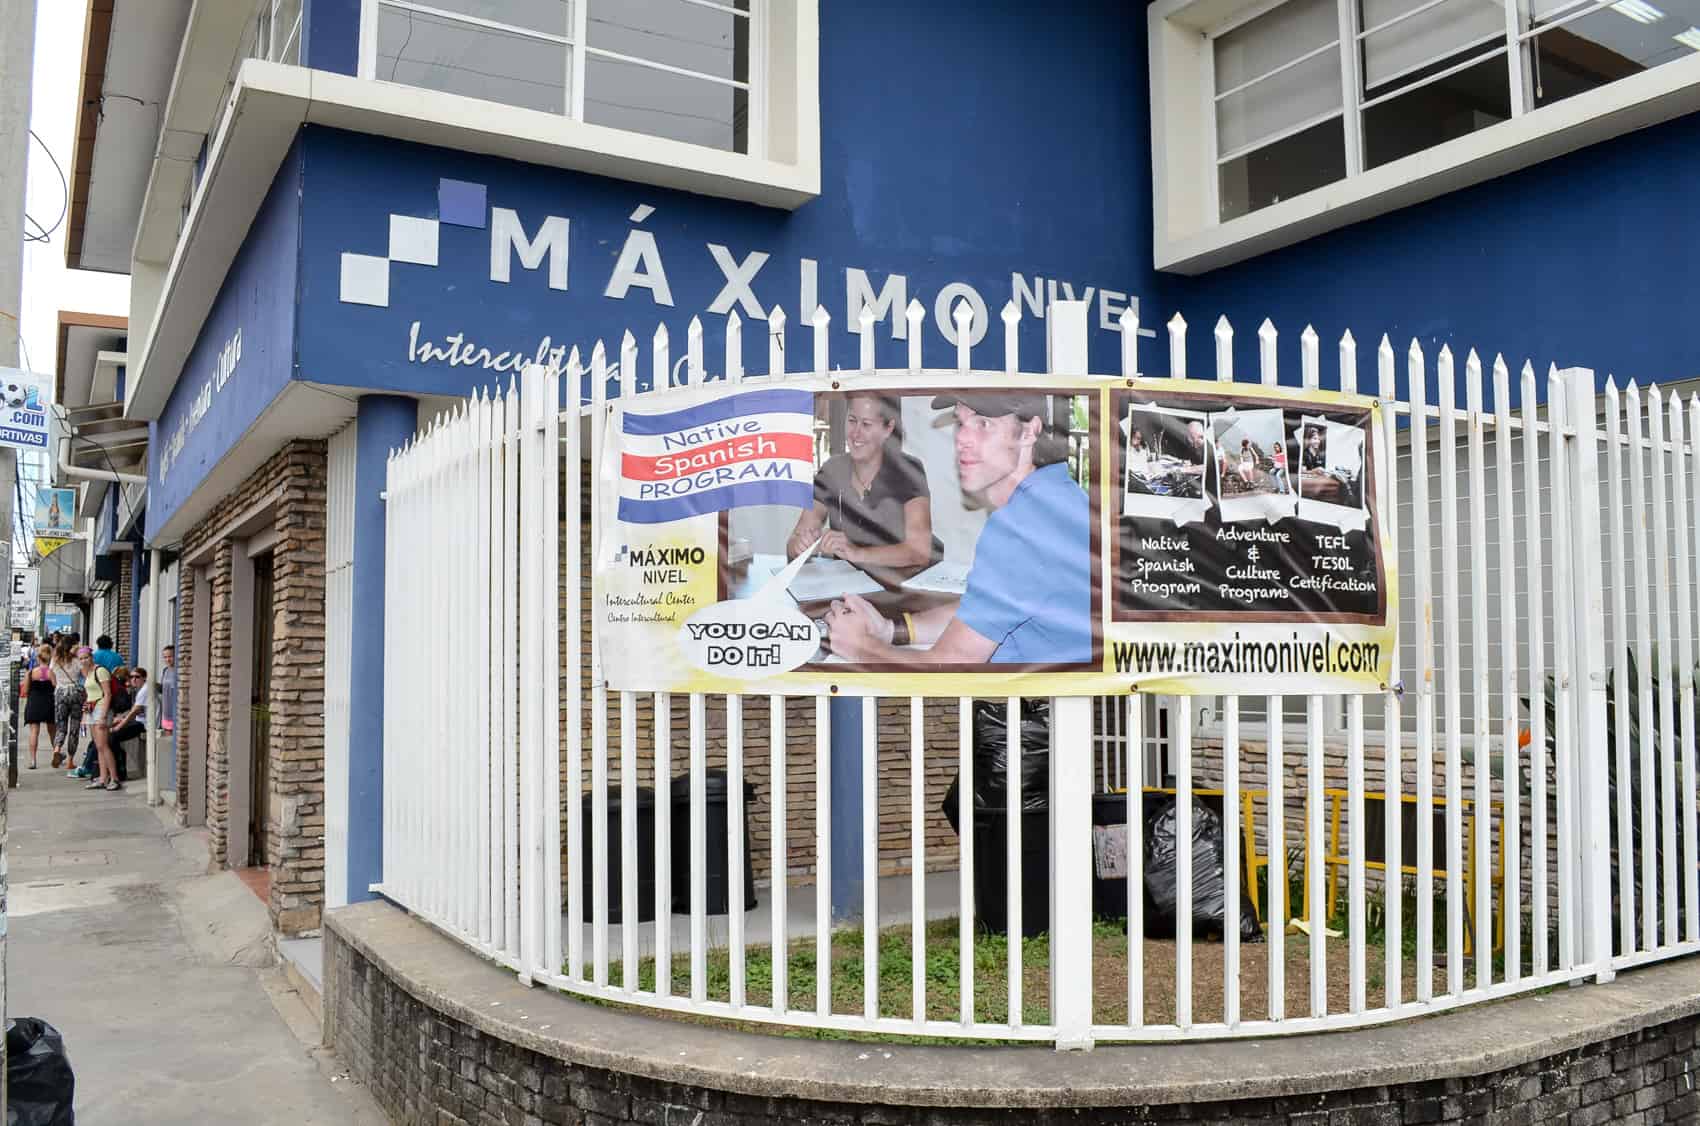 The Máximo Nivel Building located in San Pedro, east of San José, March 17, 2015.